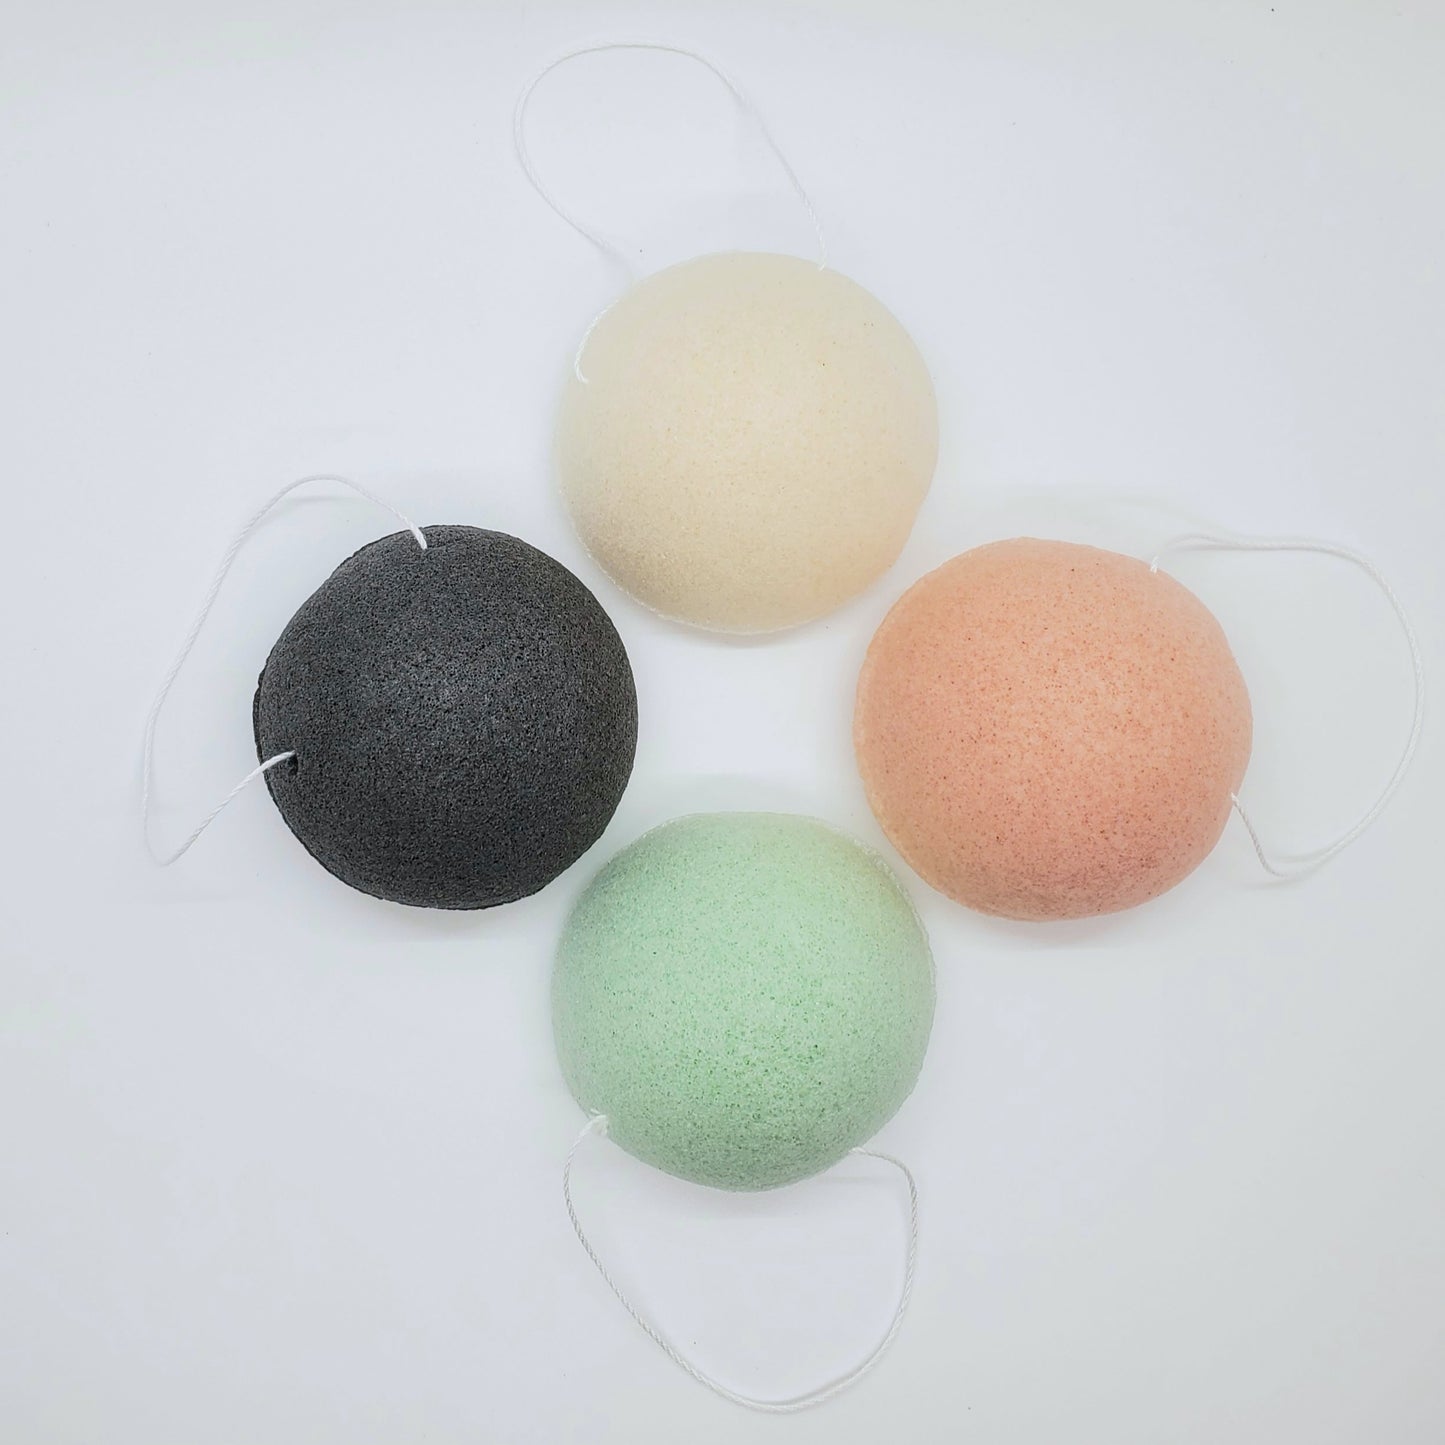 Set of 4 Assorted Konjac Sponges for Face - Gentle Exfoliation and Eco-Friendly